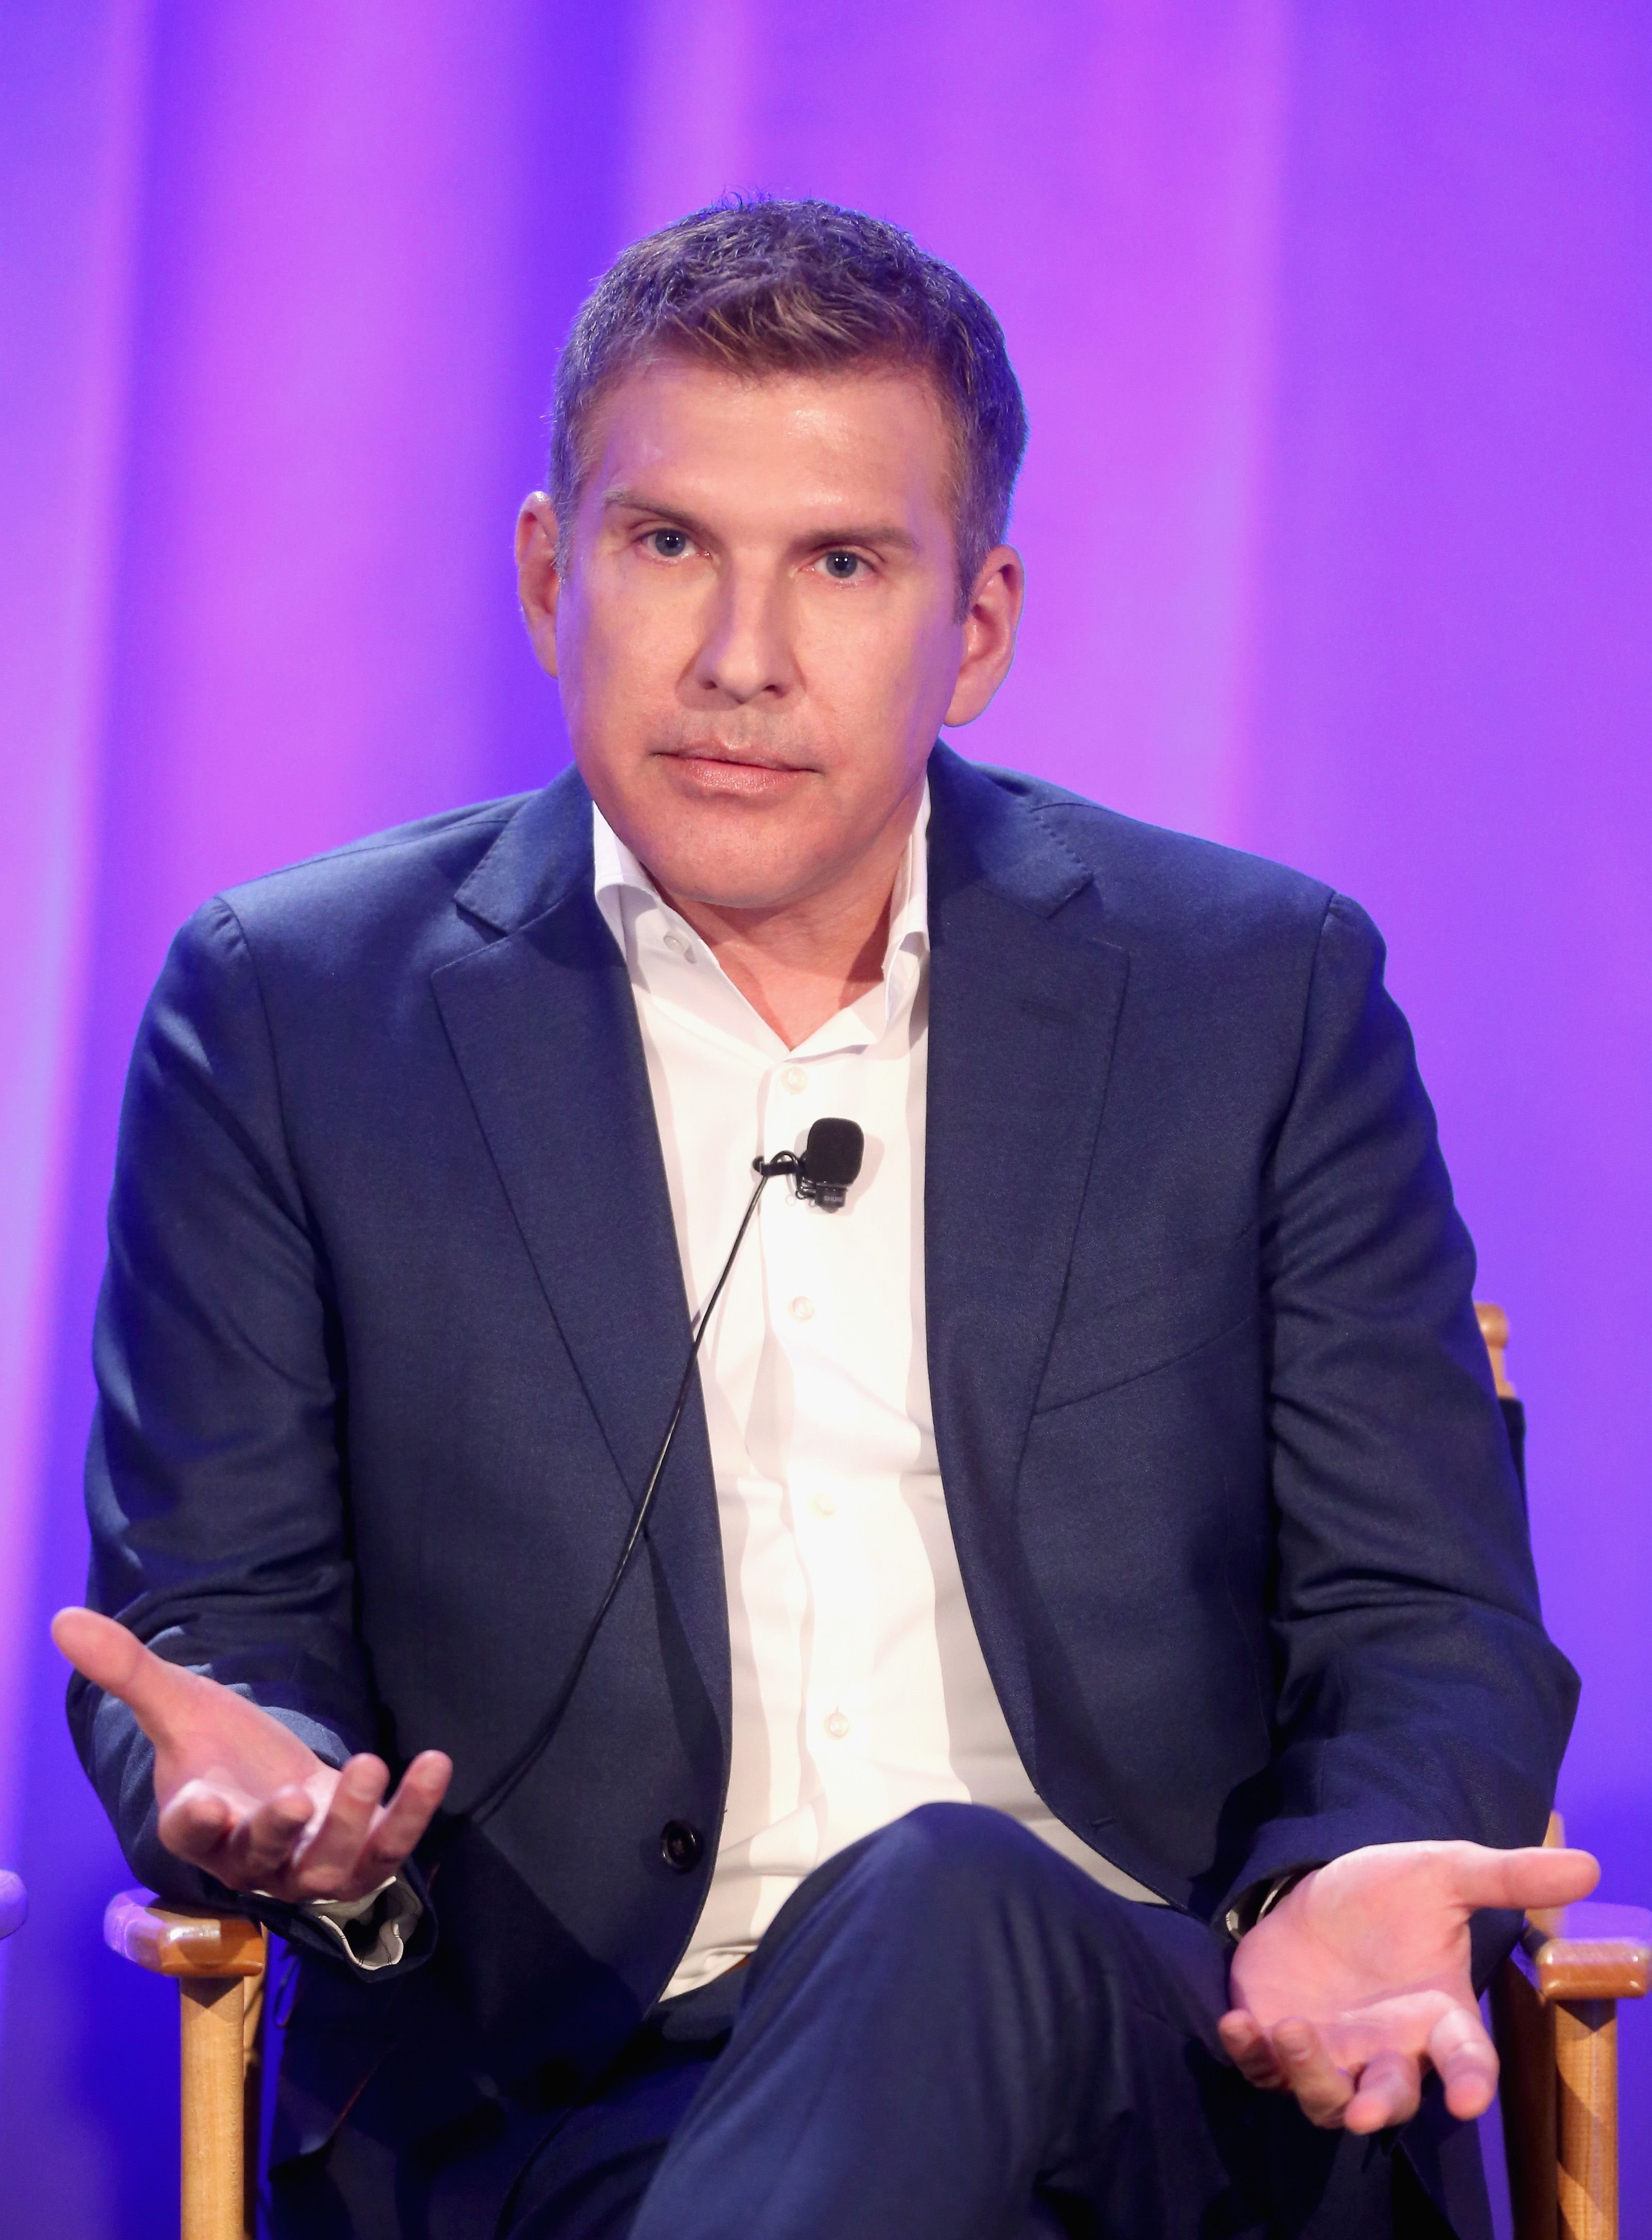 Todd Chrisley at the 'Chrisley Knows Best' panel at the 2016 NBCUniversal Summer Press Day at Four Seasons Hotel Westlake Village on April 1, 2016 in Westlake Village, California. | Source: Getty Images